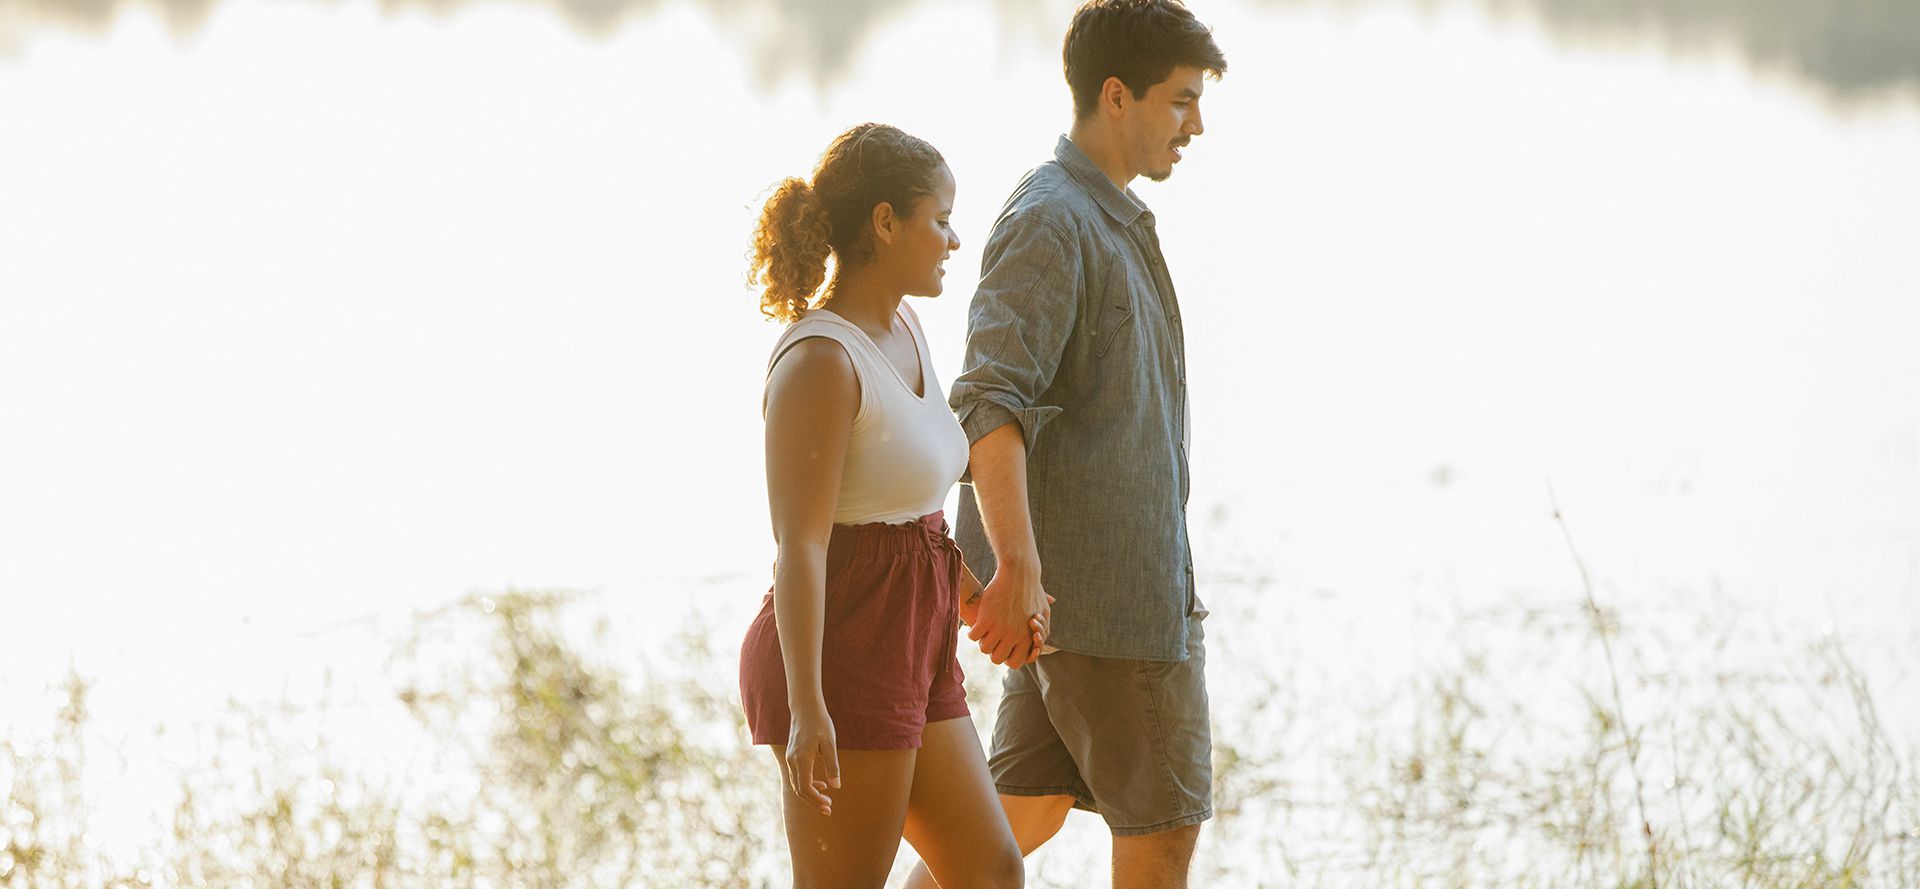 People with casual relationships walk near the river.